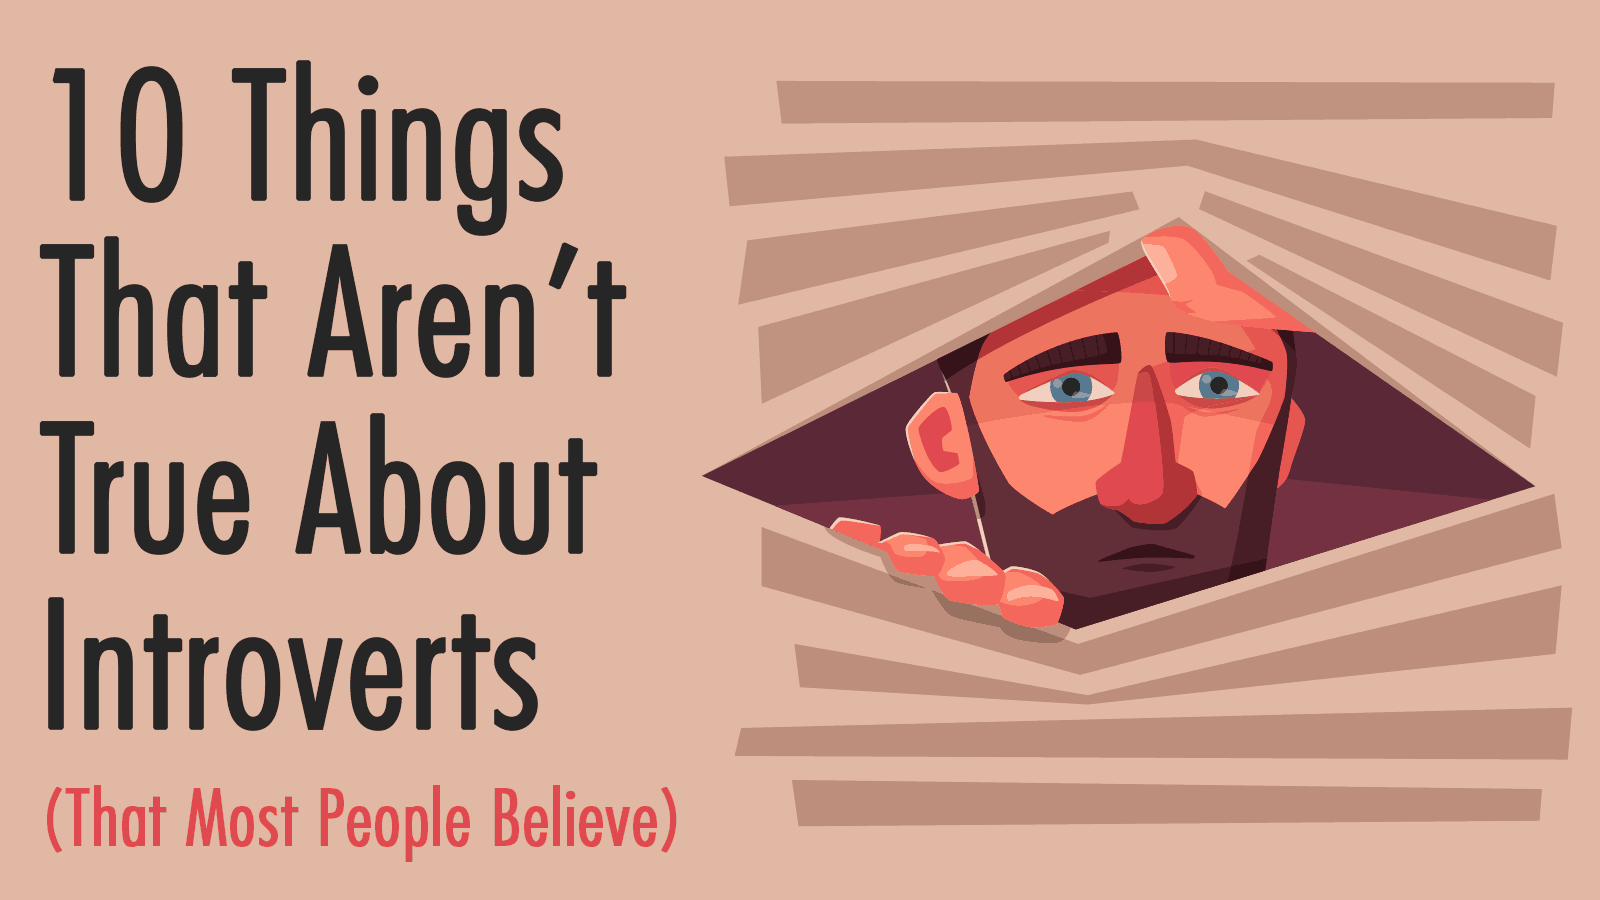 10 Things That Aren’t True About Introverts (That Most People Believe)